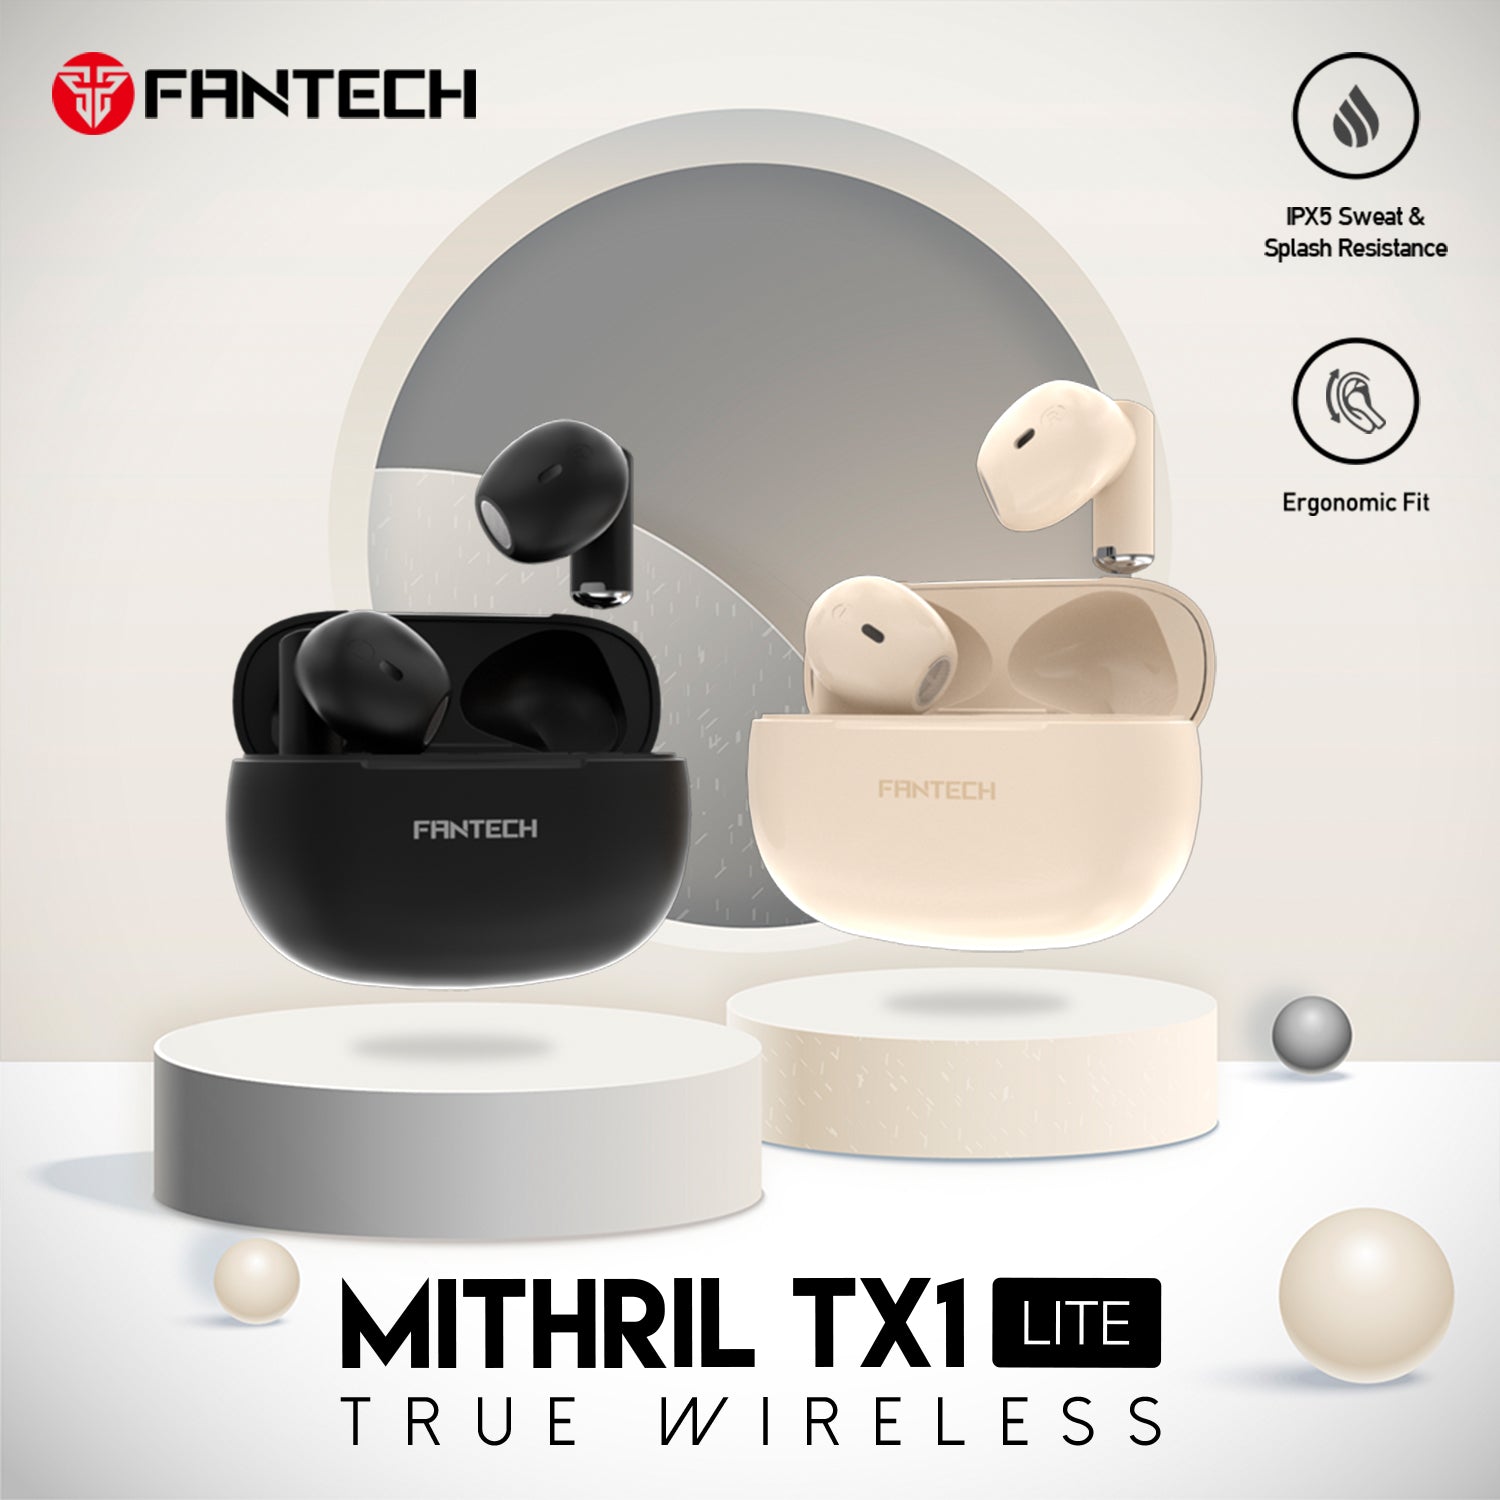 Fantech Mithril TX1 Lite TWS Earbuds With IPX5 JOD 20